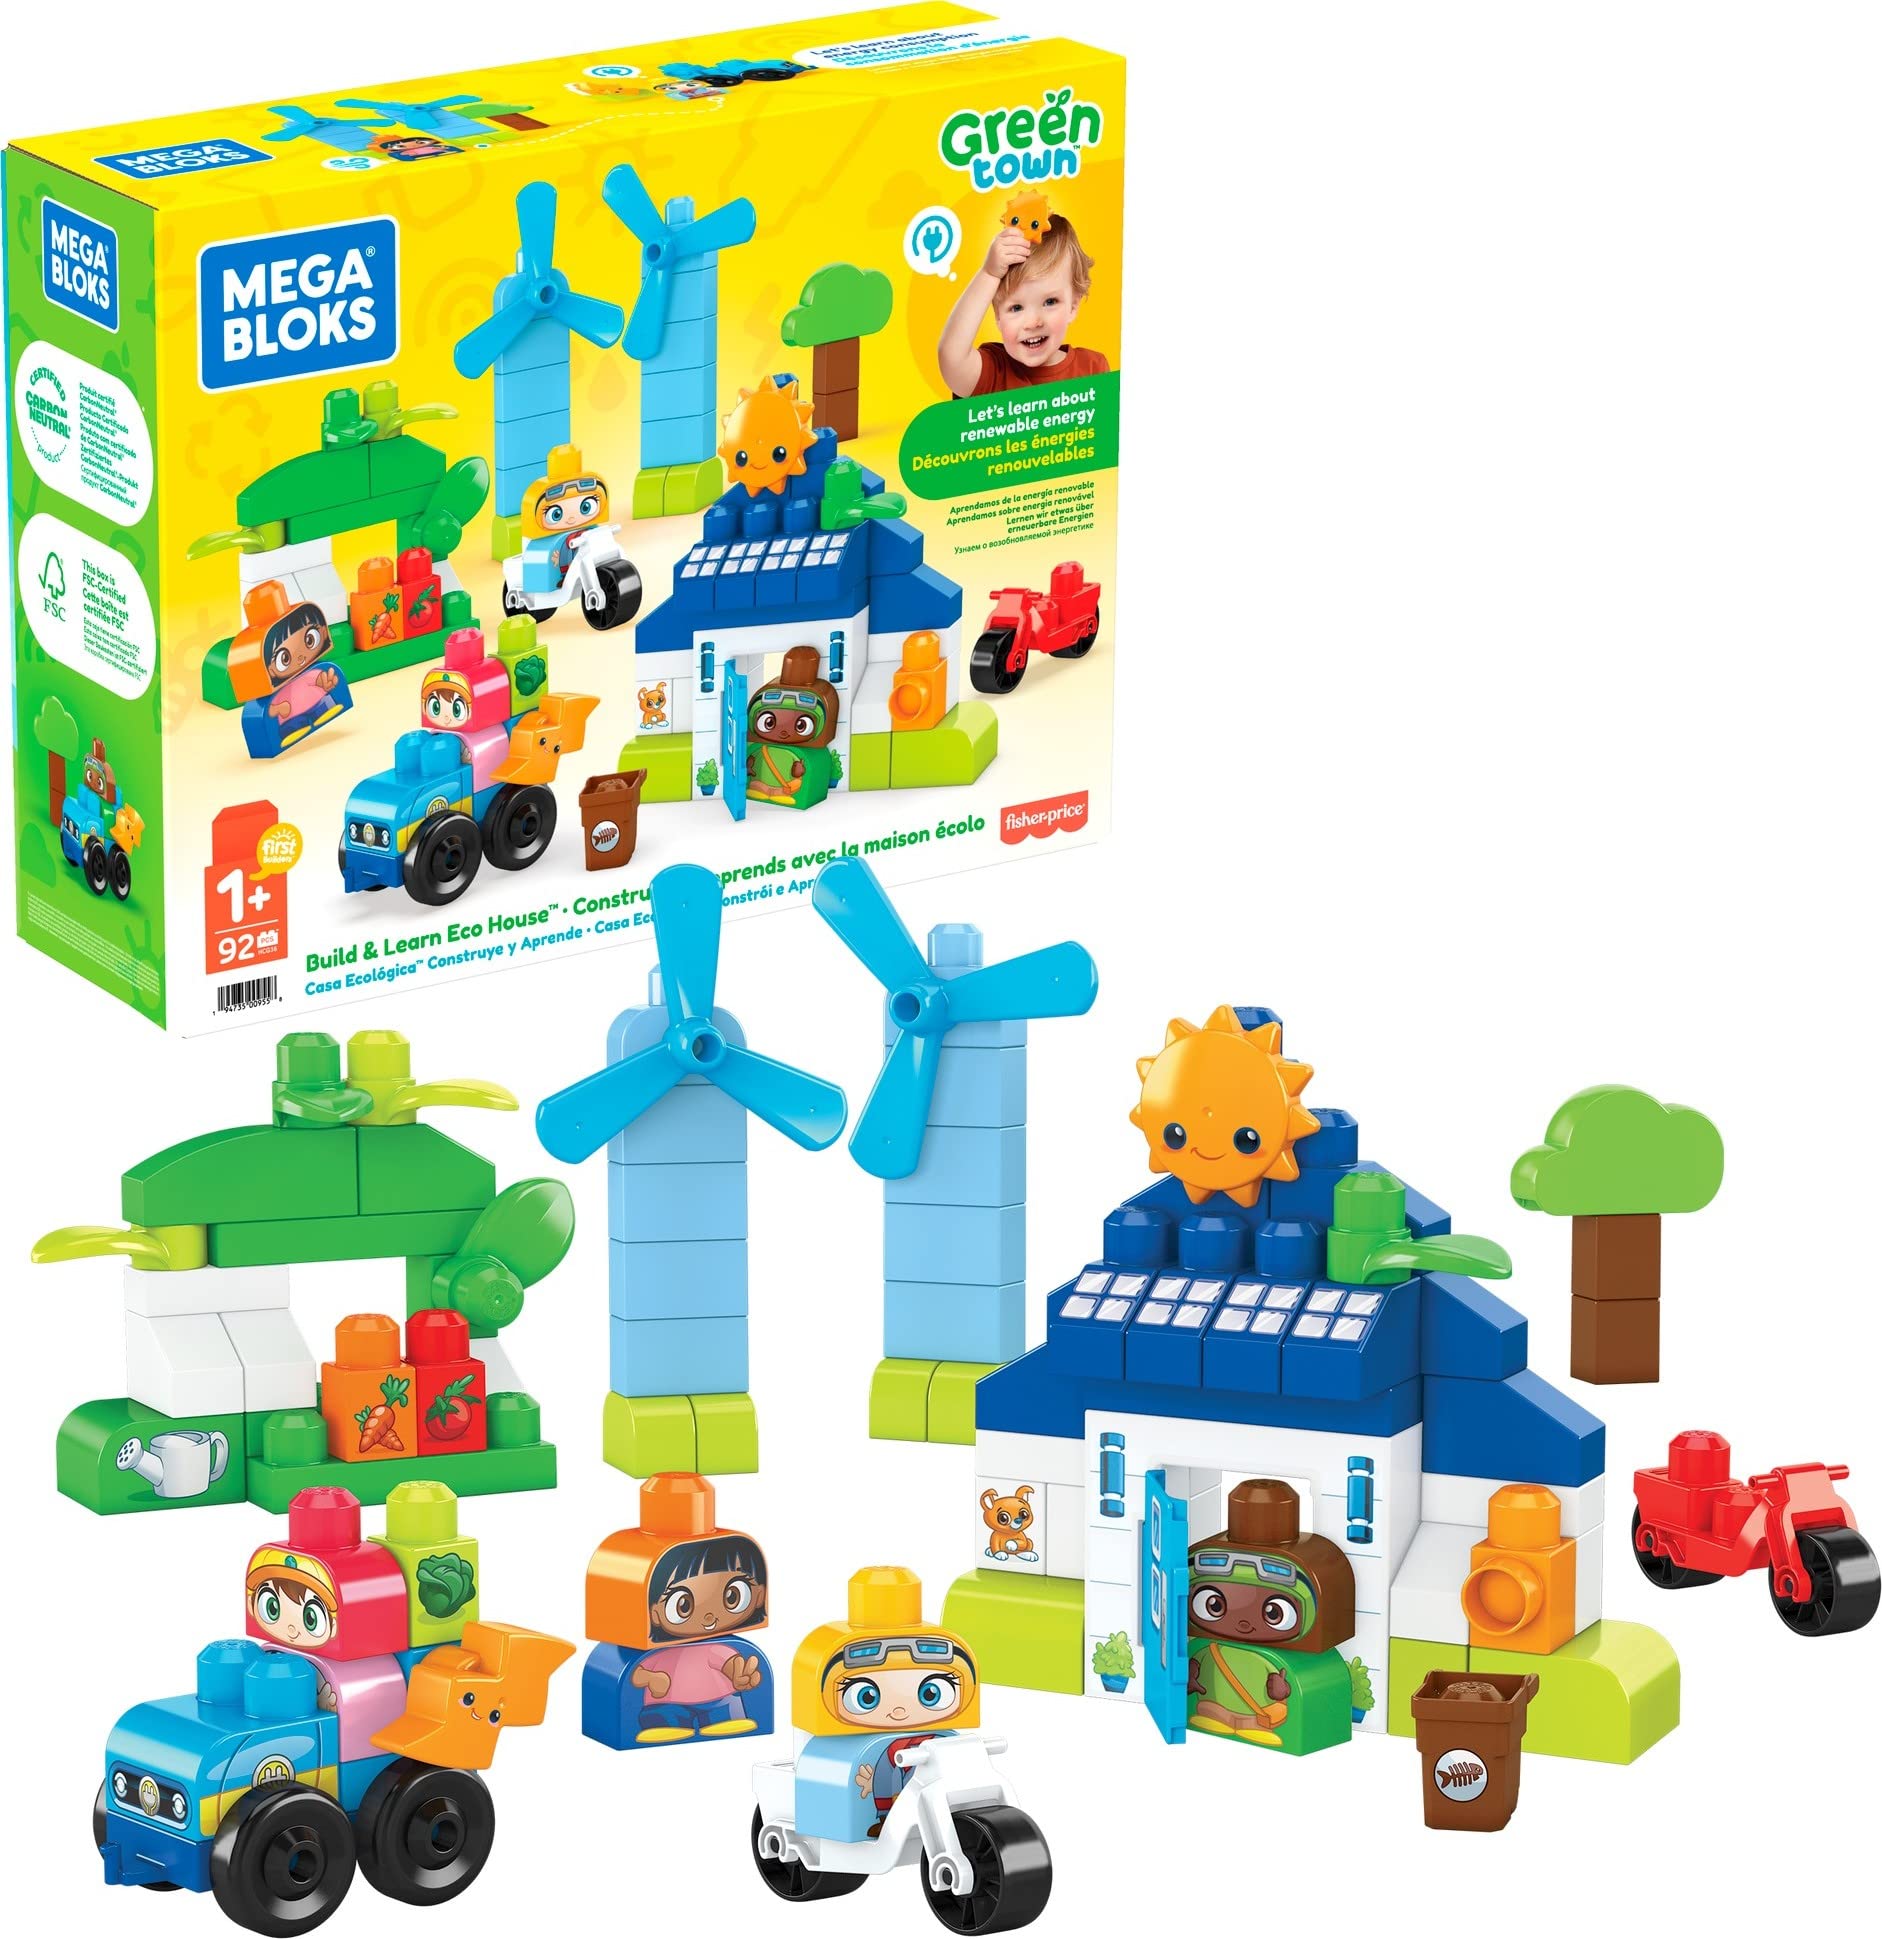 88 Piece Mega BLOKS Fisher-Price Toddler Building Blocks, Green Town Build & Learn Eco House  $8.49 w/ Prime shipping